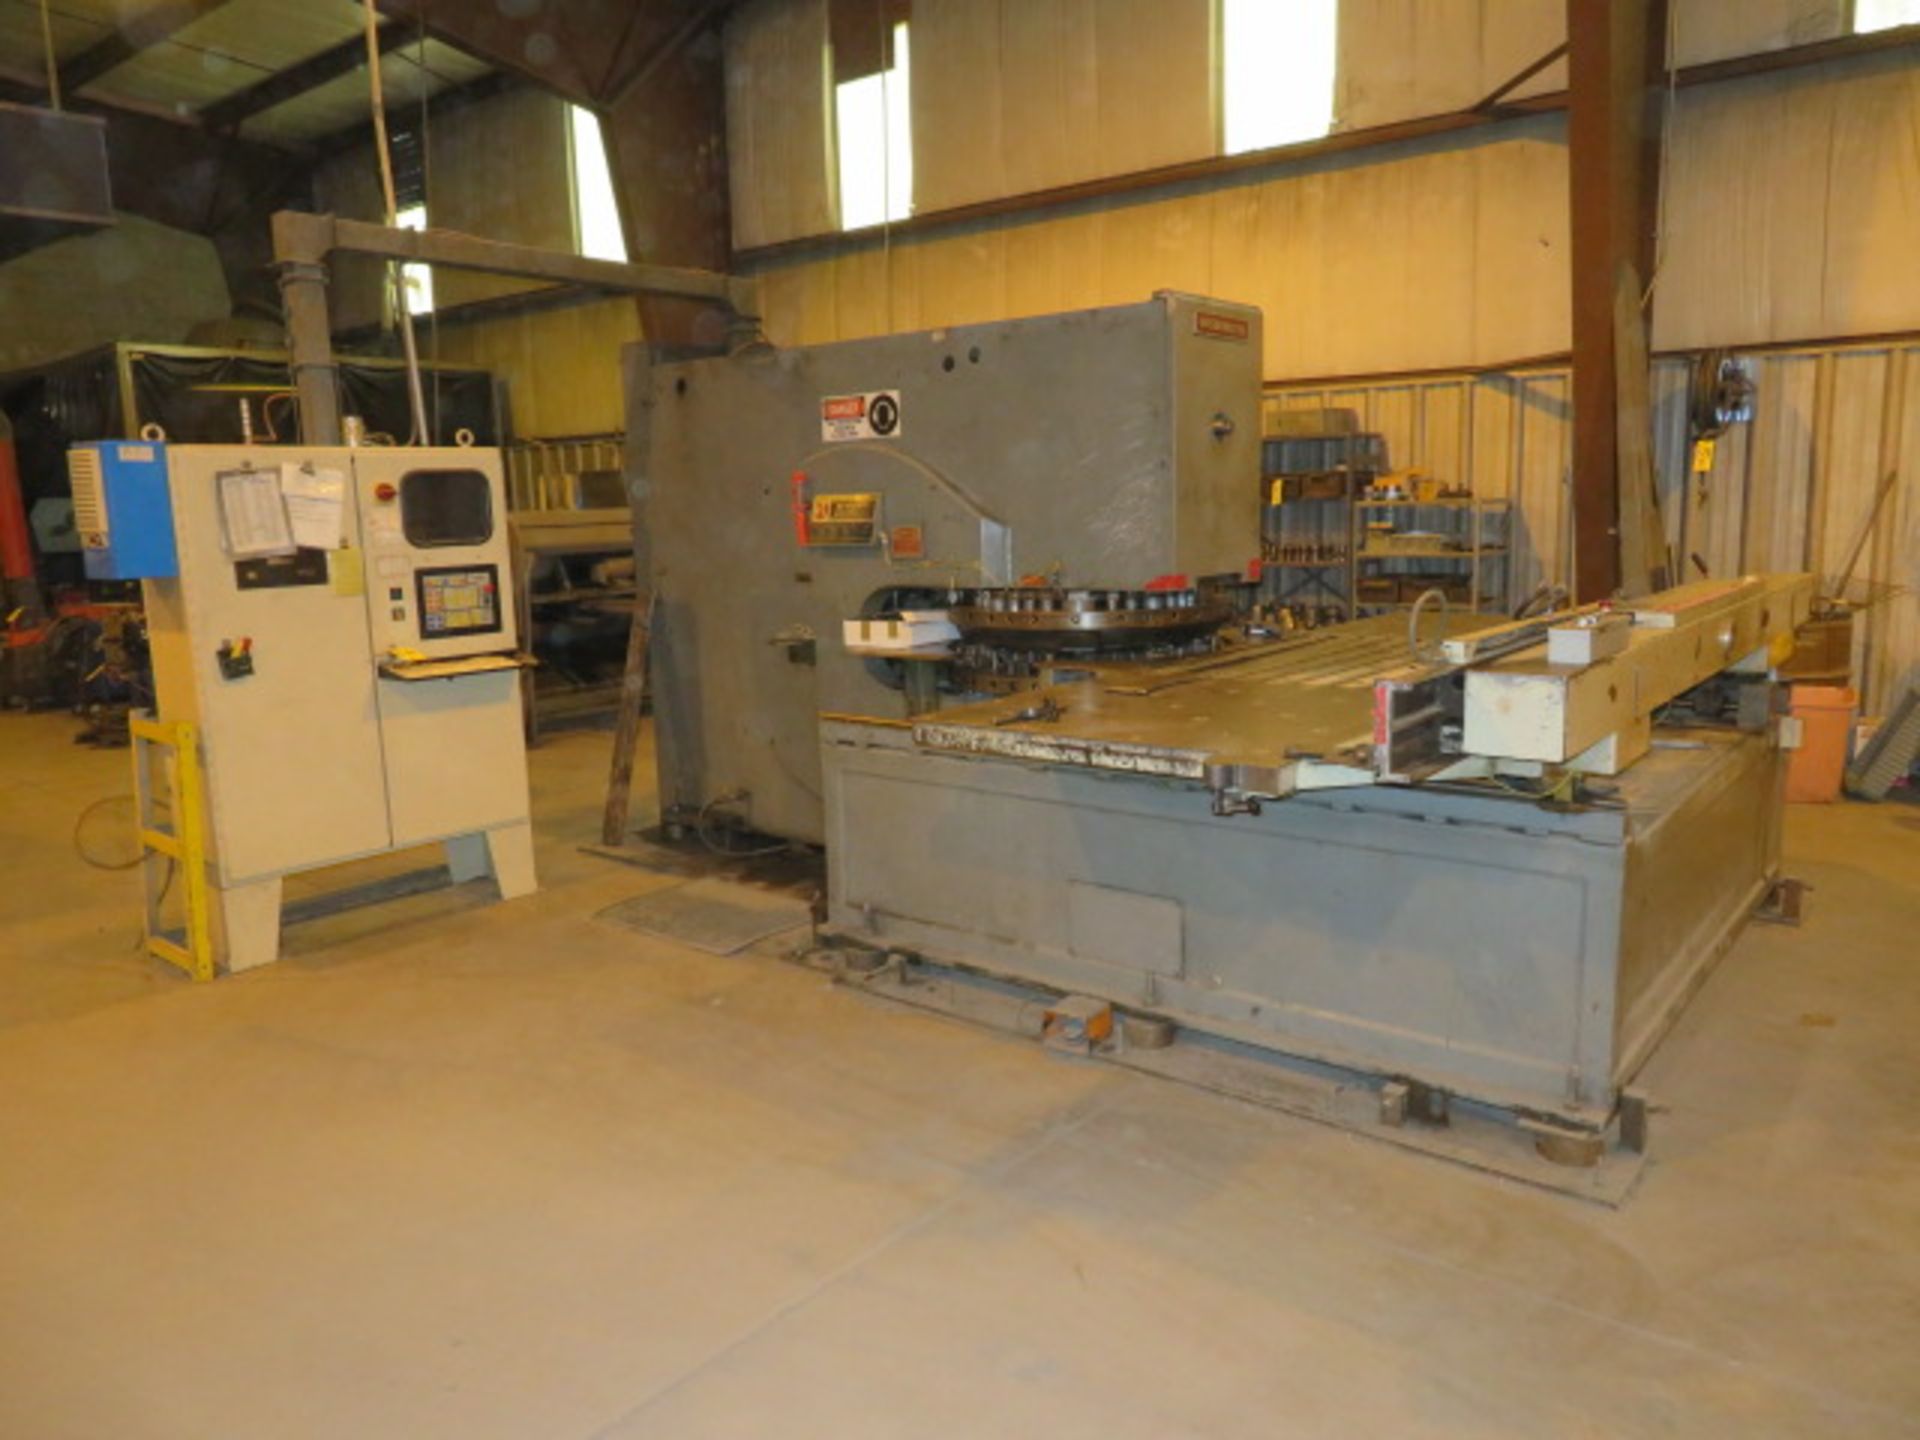 WARNER & SWASEY S4050 WIEDEMATIC CNC TURRET PUNCH, S/N 239 (RETROFITTED WITH) MILON X-CEL SLICER CNC